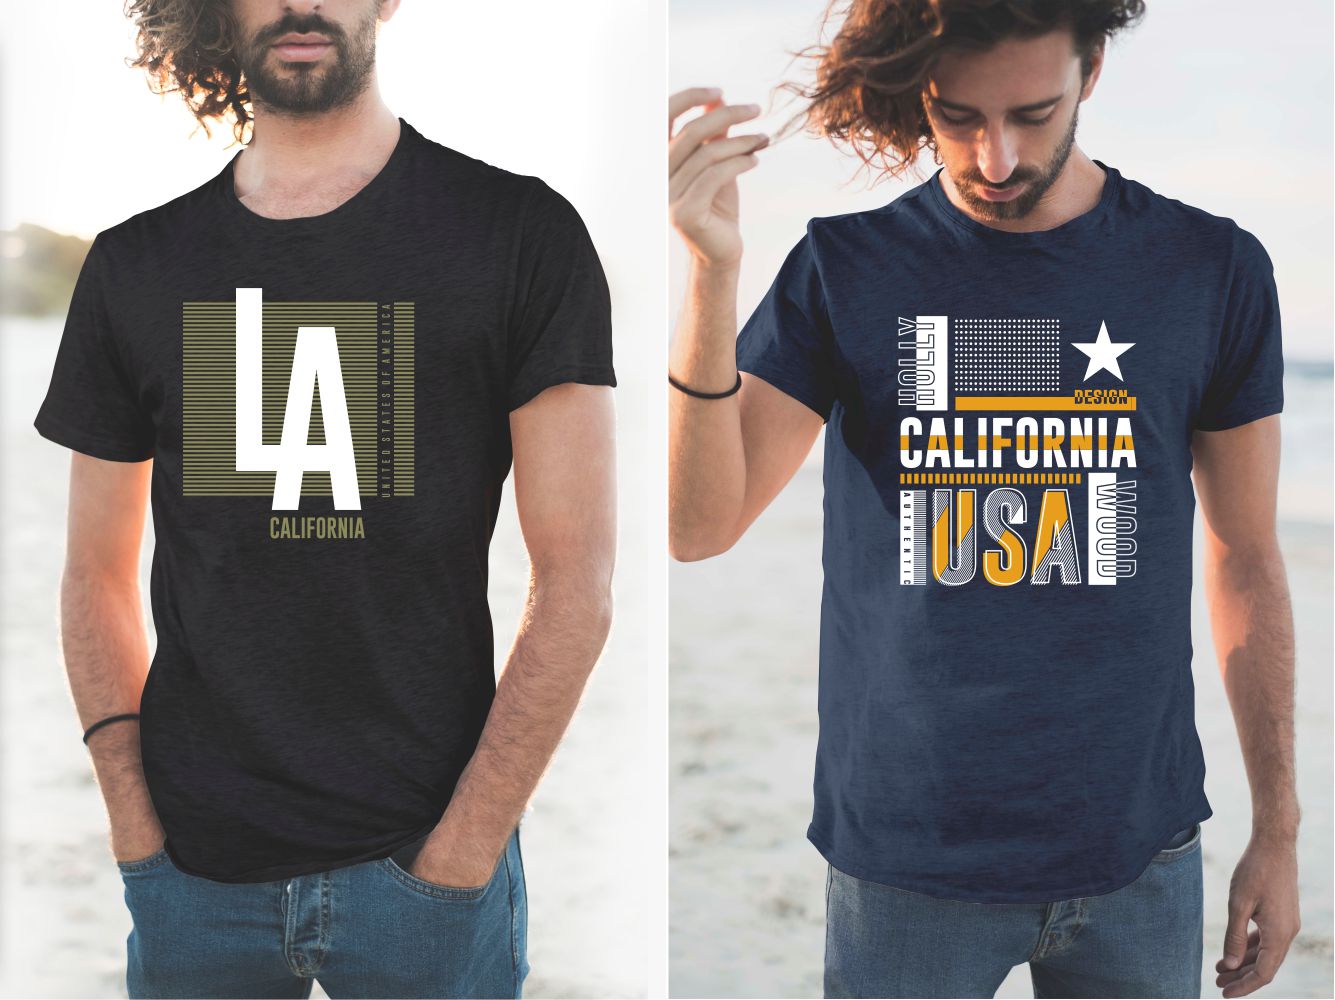 Black and blue T-shirts with embossed original design of the California name.